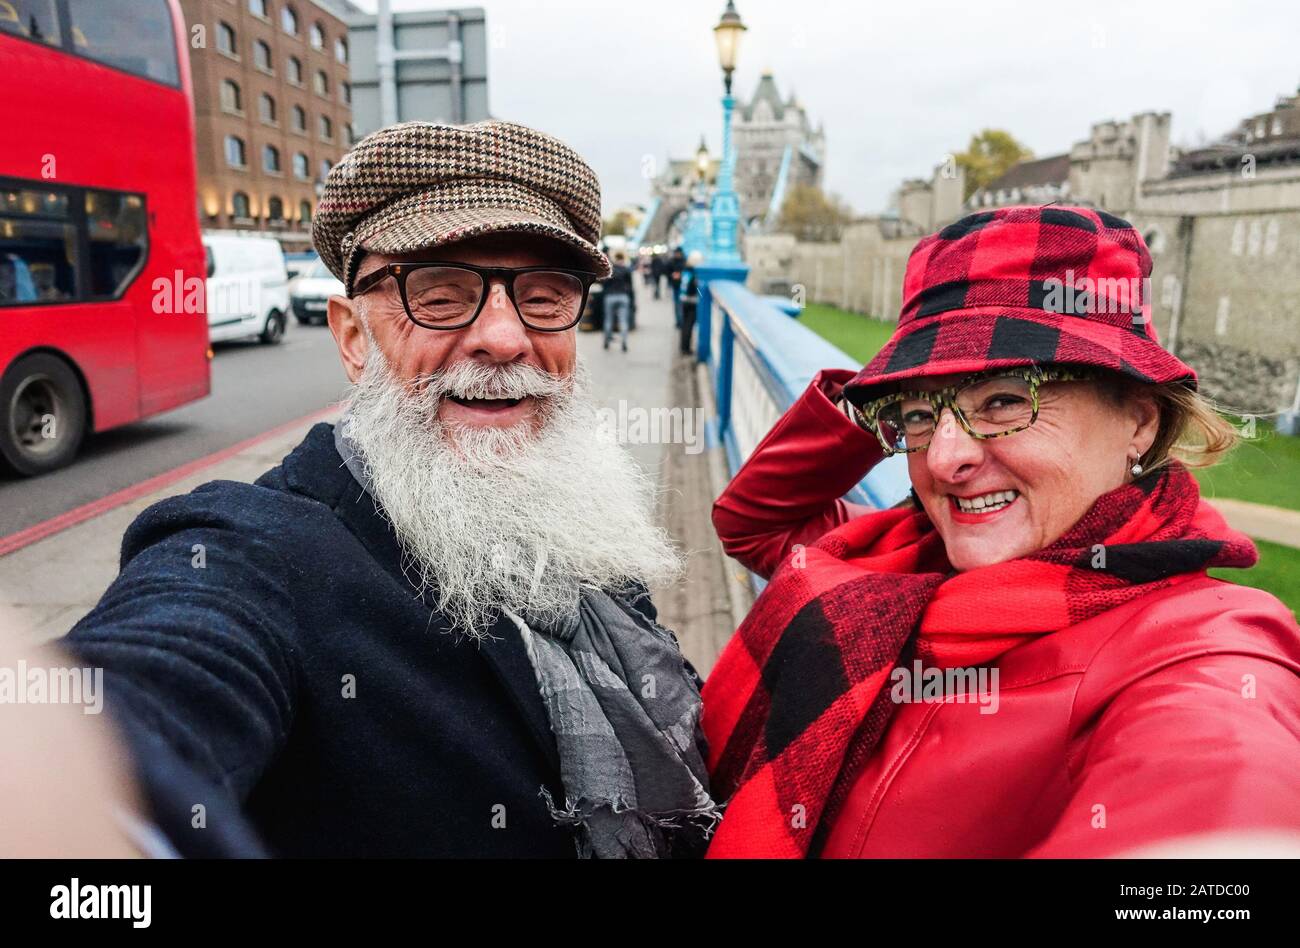 Happy senior couple taking selfie in london - Old trendy people having fun with technology trends - Travel and joyful elderly lifestyle concept - Main Stock Photo